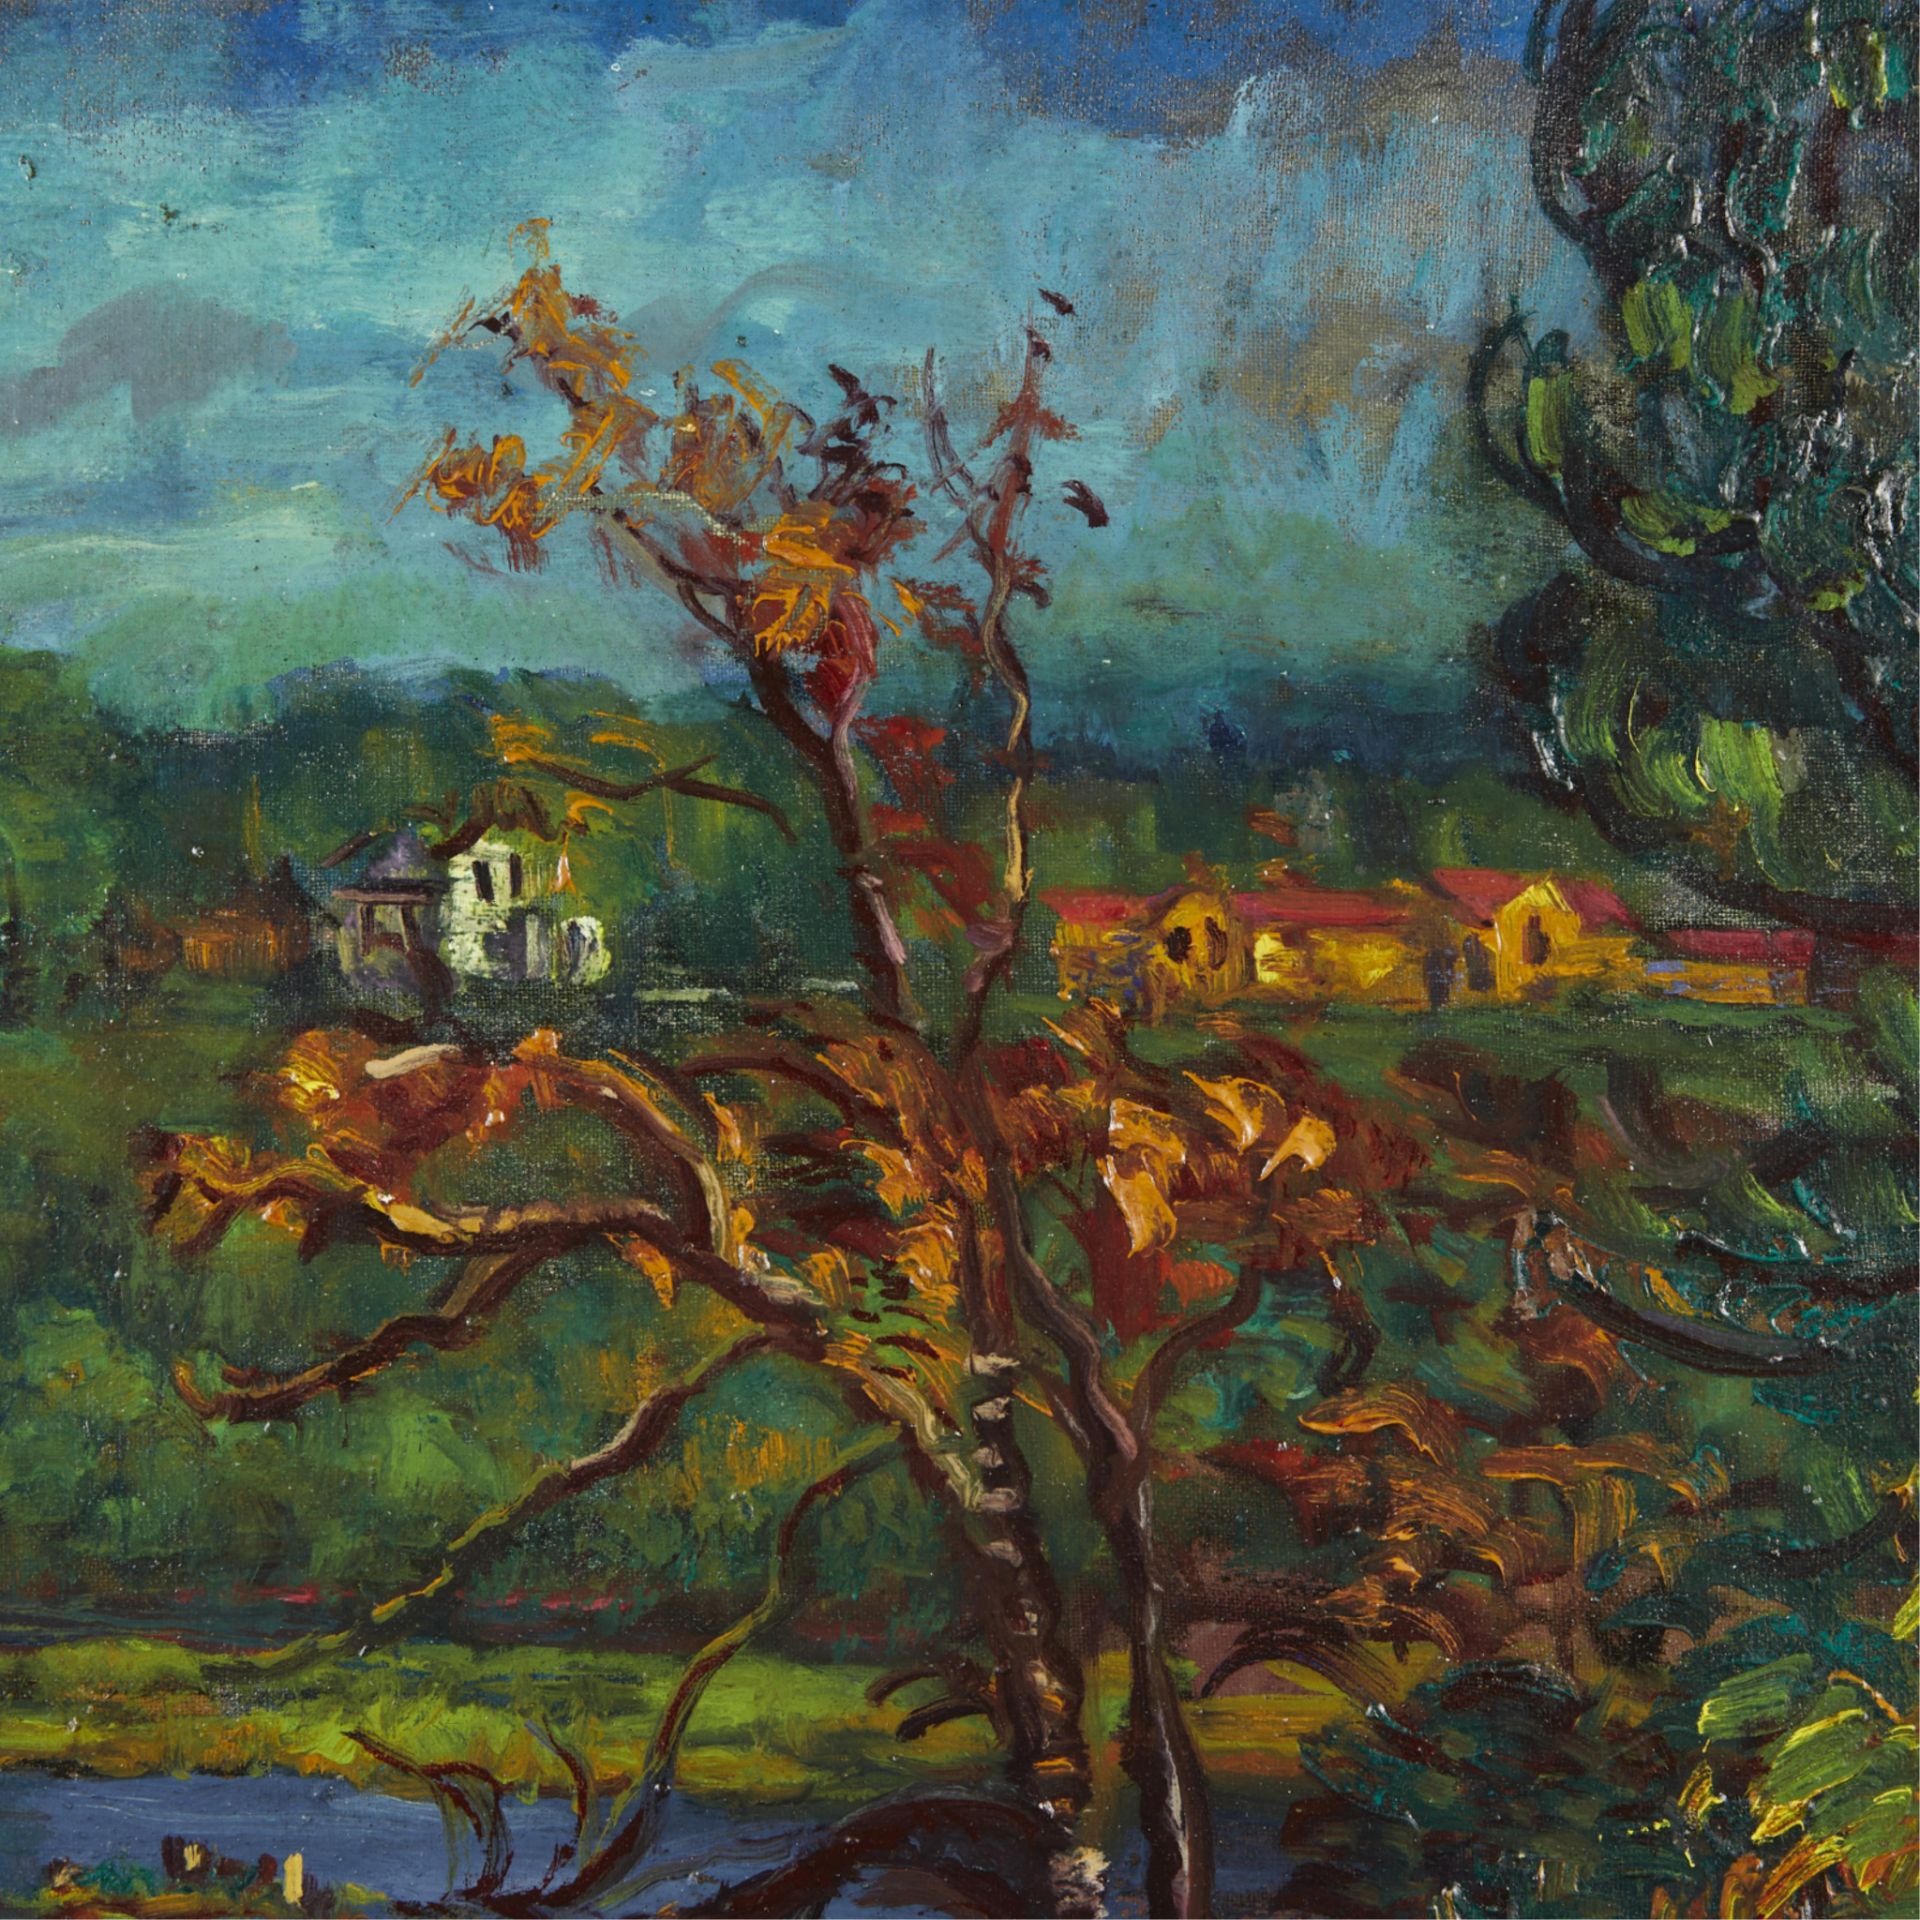 Ada Wolfe "Mississippi River - Autumn" Painting - Image 9 of 9